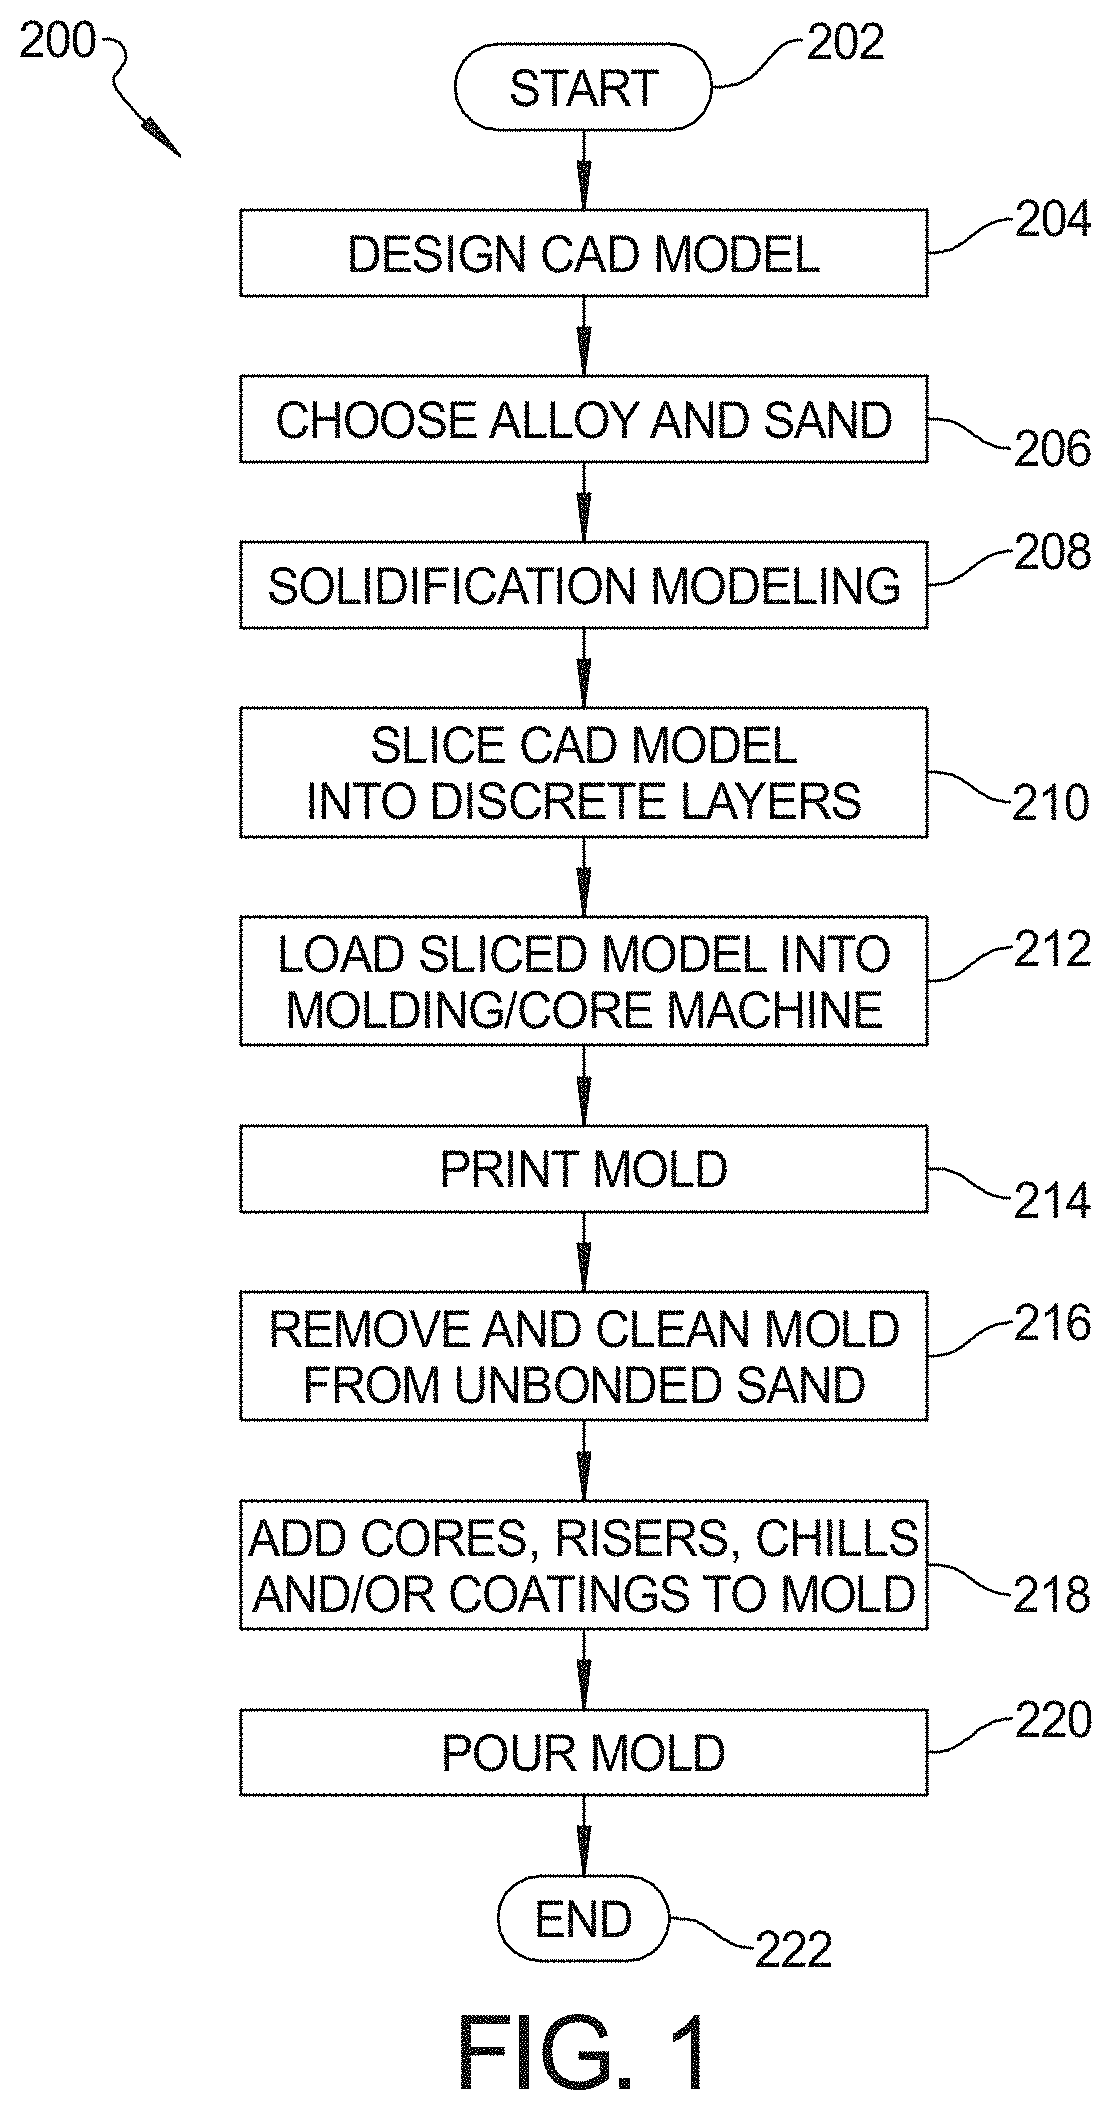 Tool-less method for making molds, cores, and temporary tools